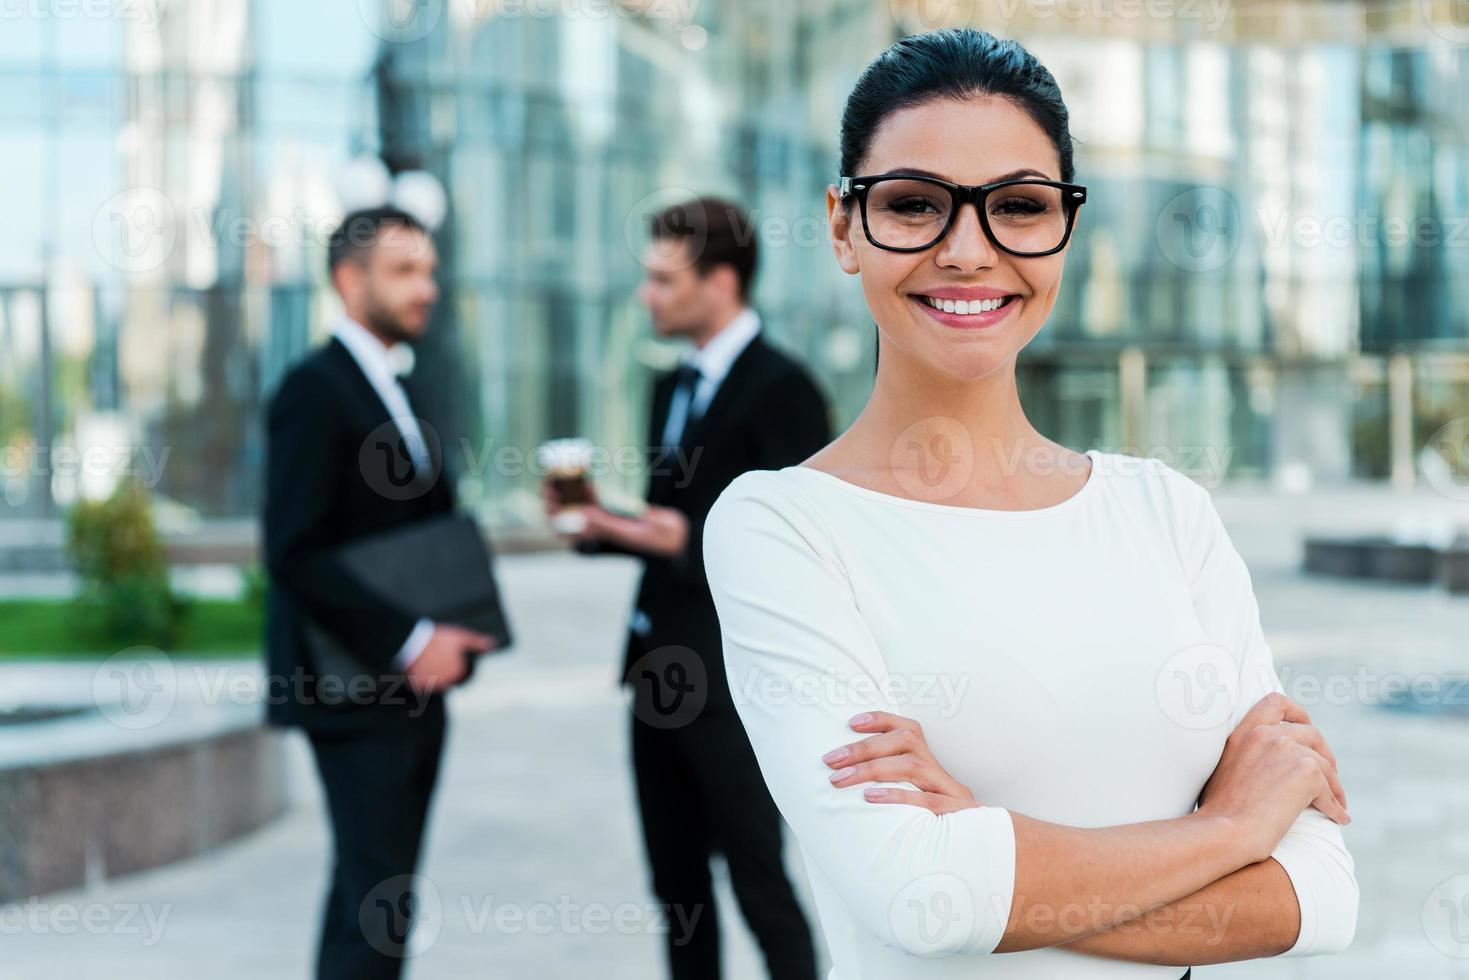 Confident businesswoman. Smiling young businesswoman keeping arms crossed and looking at camera while two her male colleagues talking to each other in the background photo